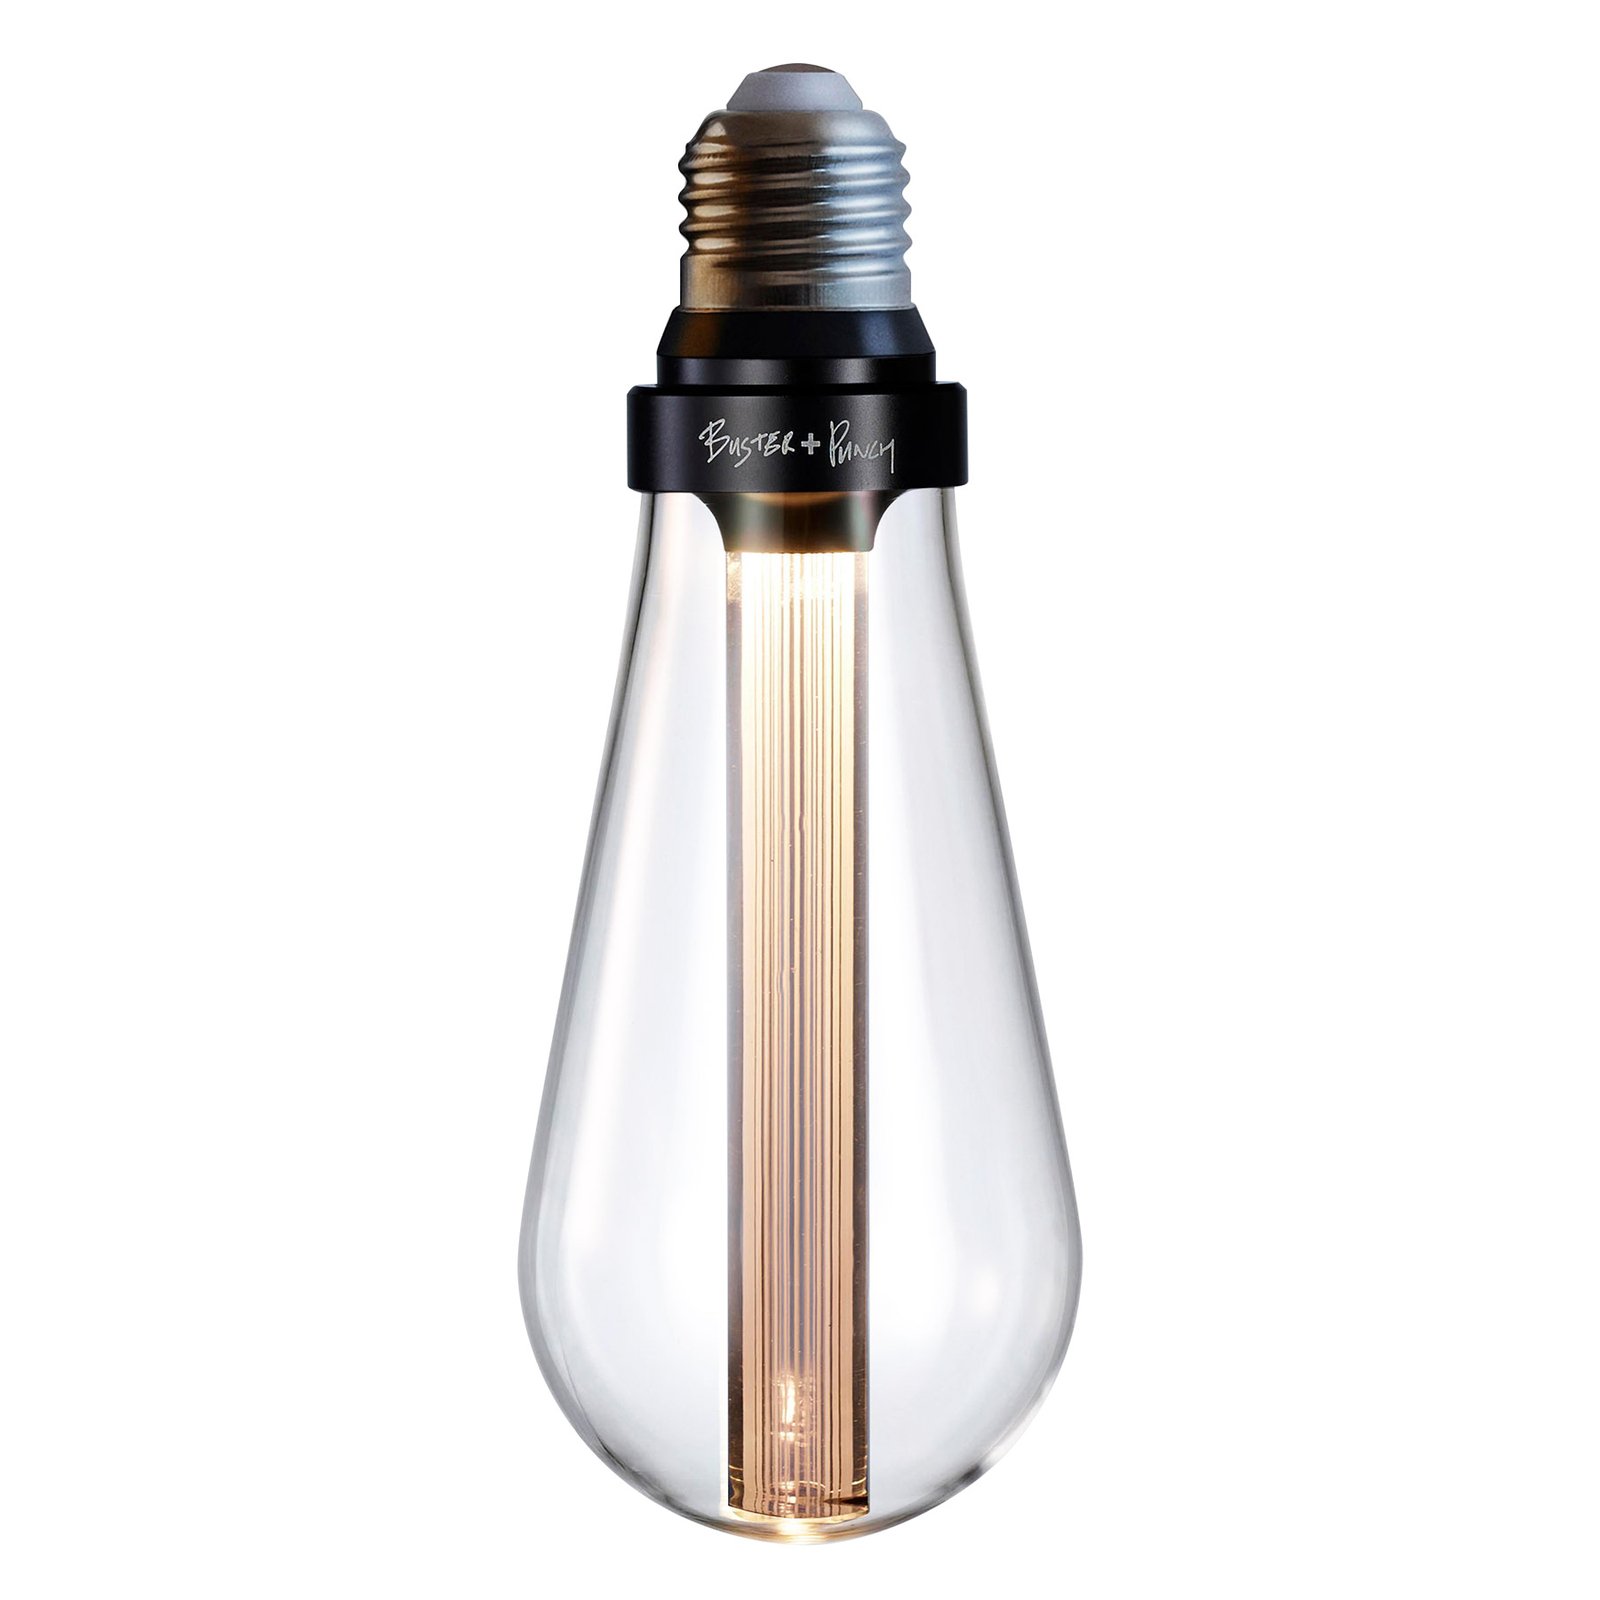 Buster + Punch LED-lampa E27 2W dimbar kristall